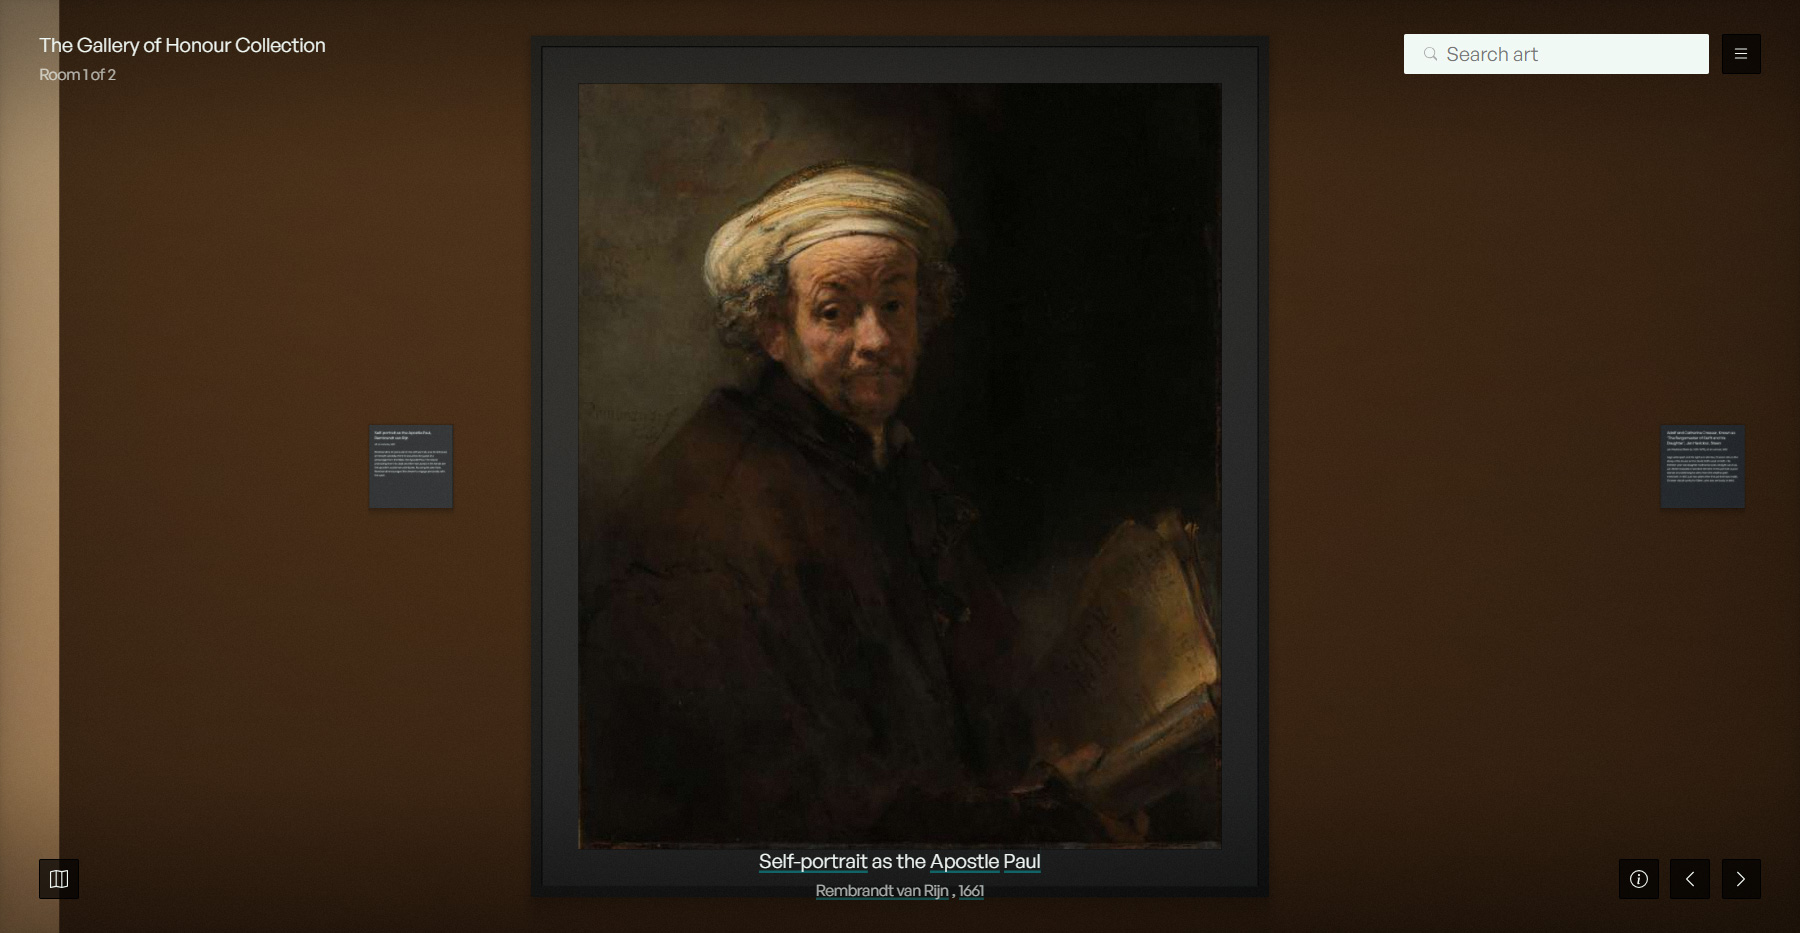 Rijkscollection - Website of the Day